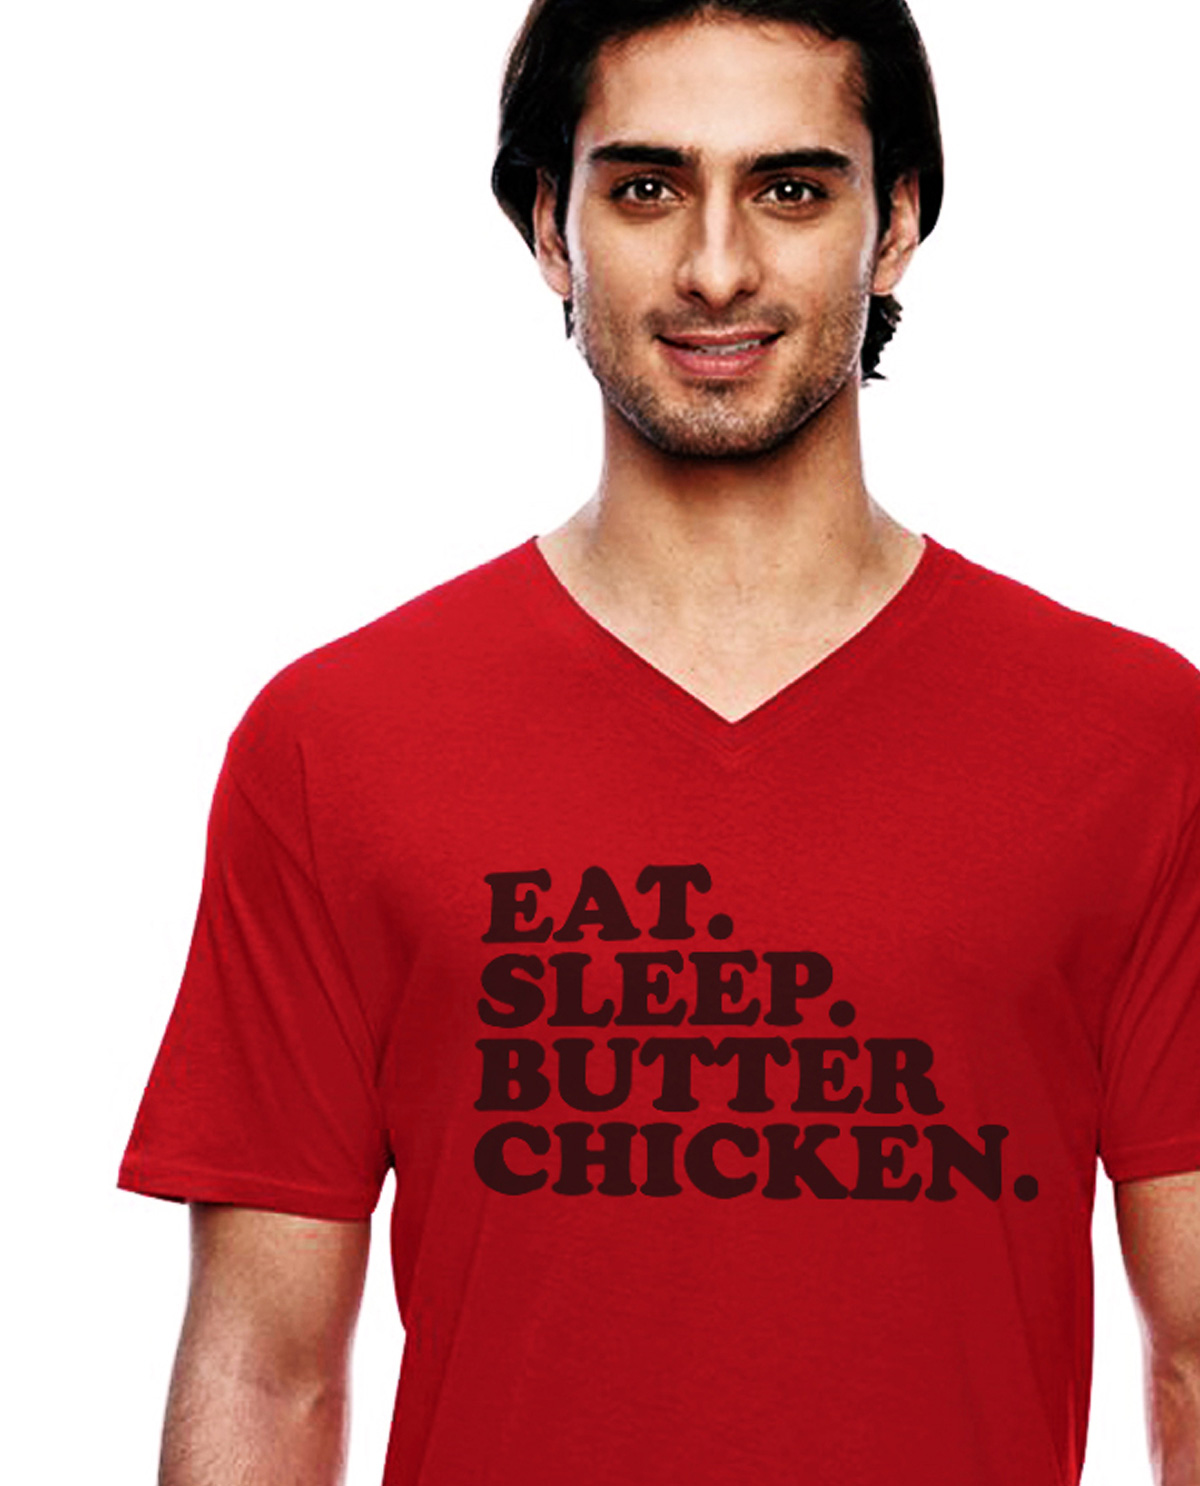 Eat. Sleep. Butter Chicken. Red V Neck graphic design t.shirt being worn by South Asian male model. South Asian Desi Themed Graphic Design t.shirts by Brown Man Clothing Co.